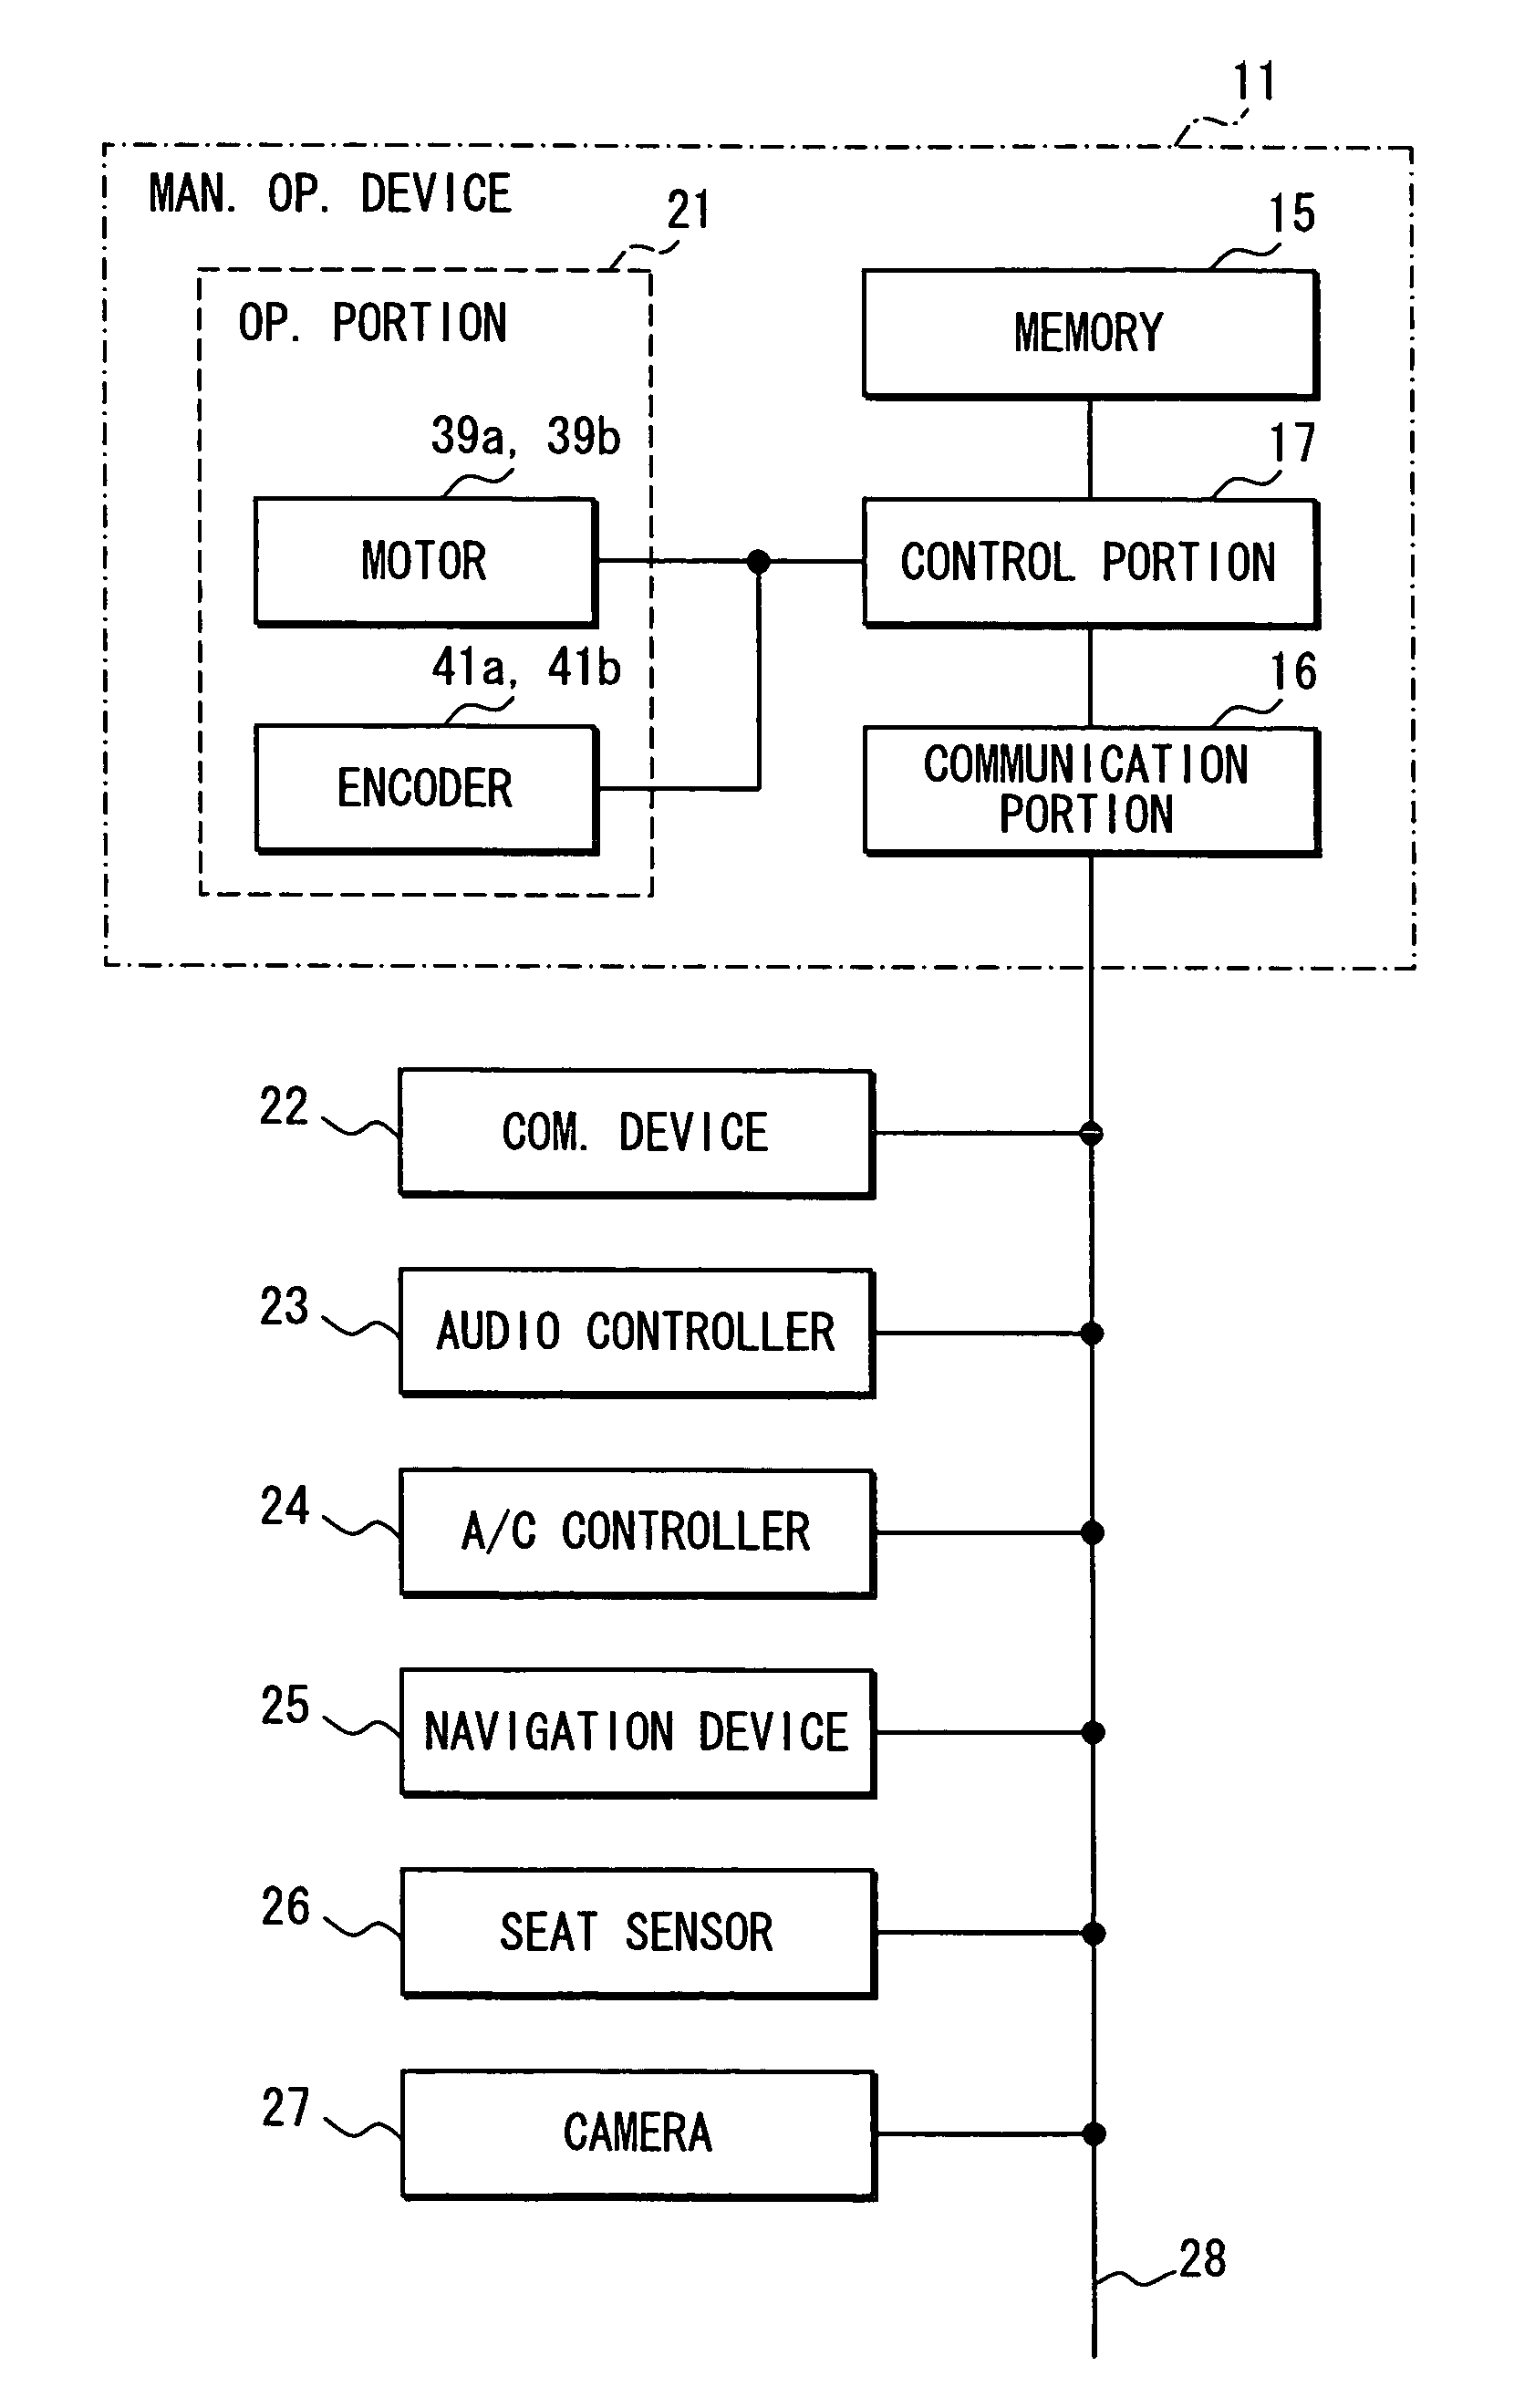 Manual operation device for automotive vehicle